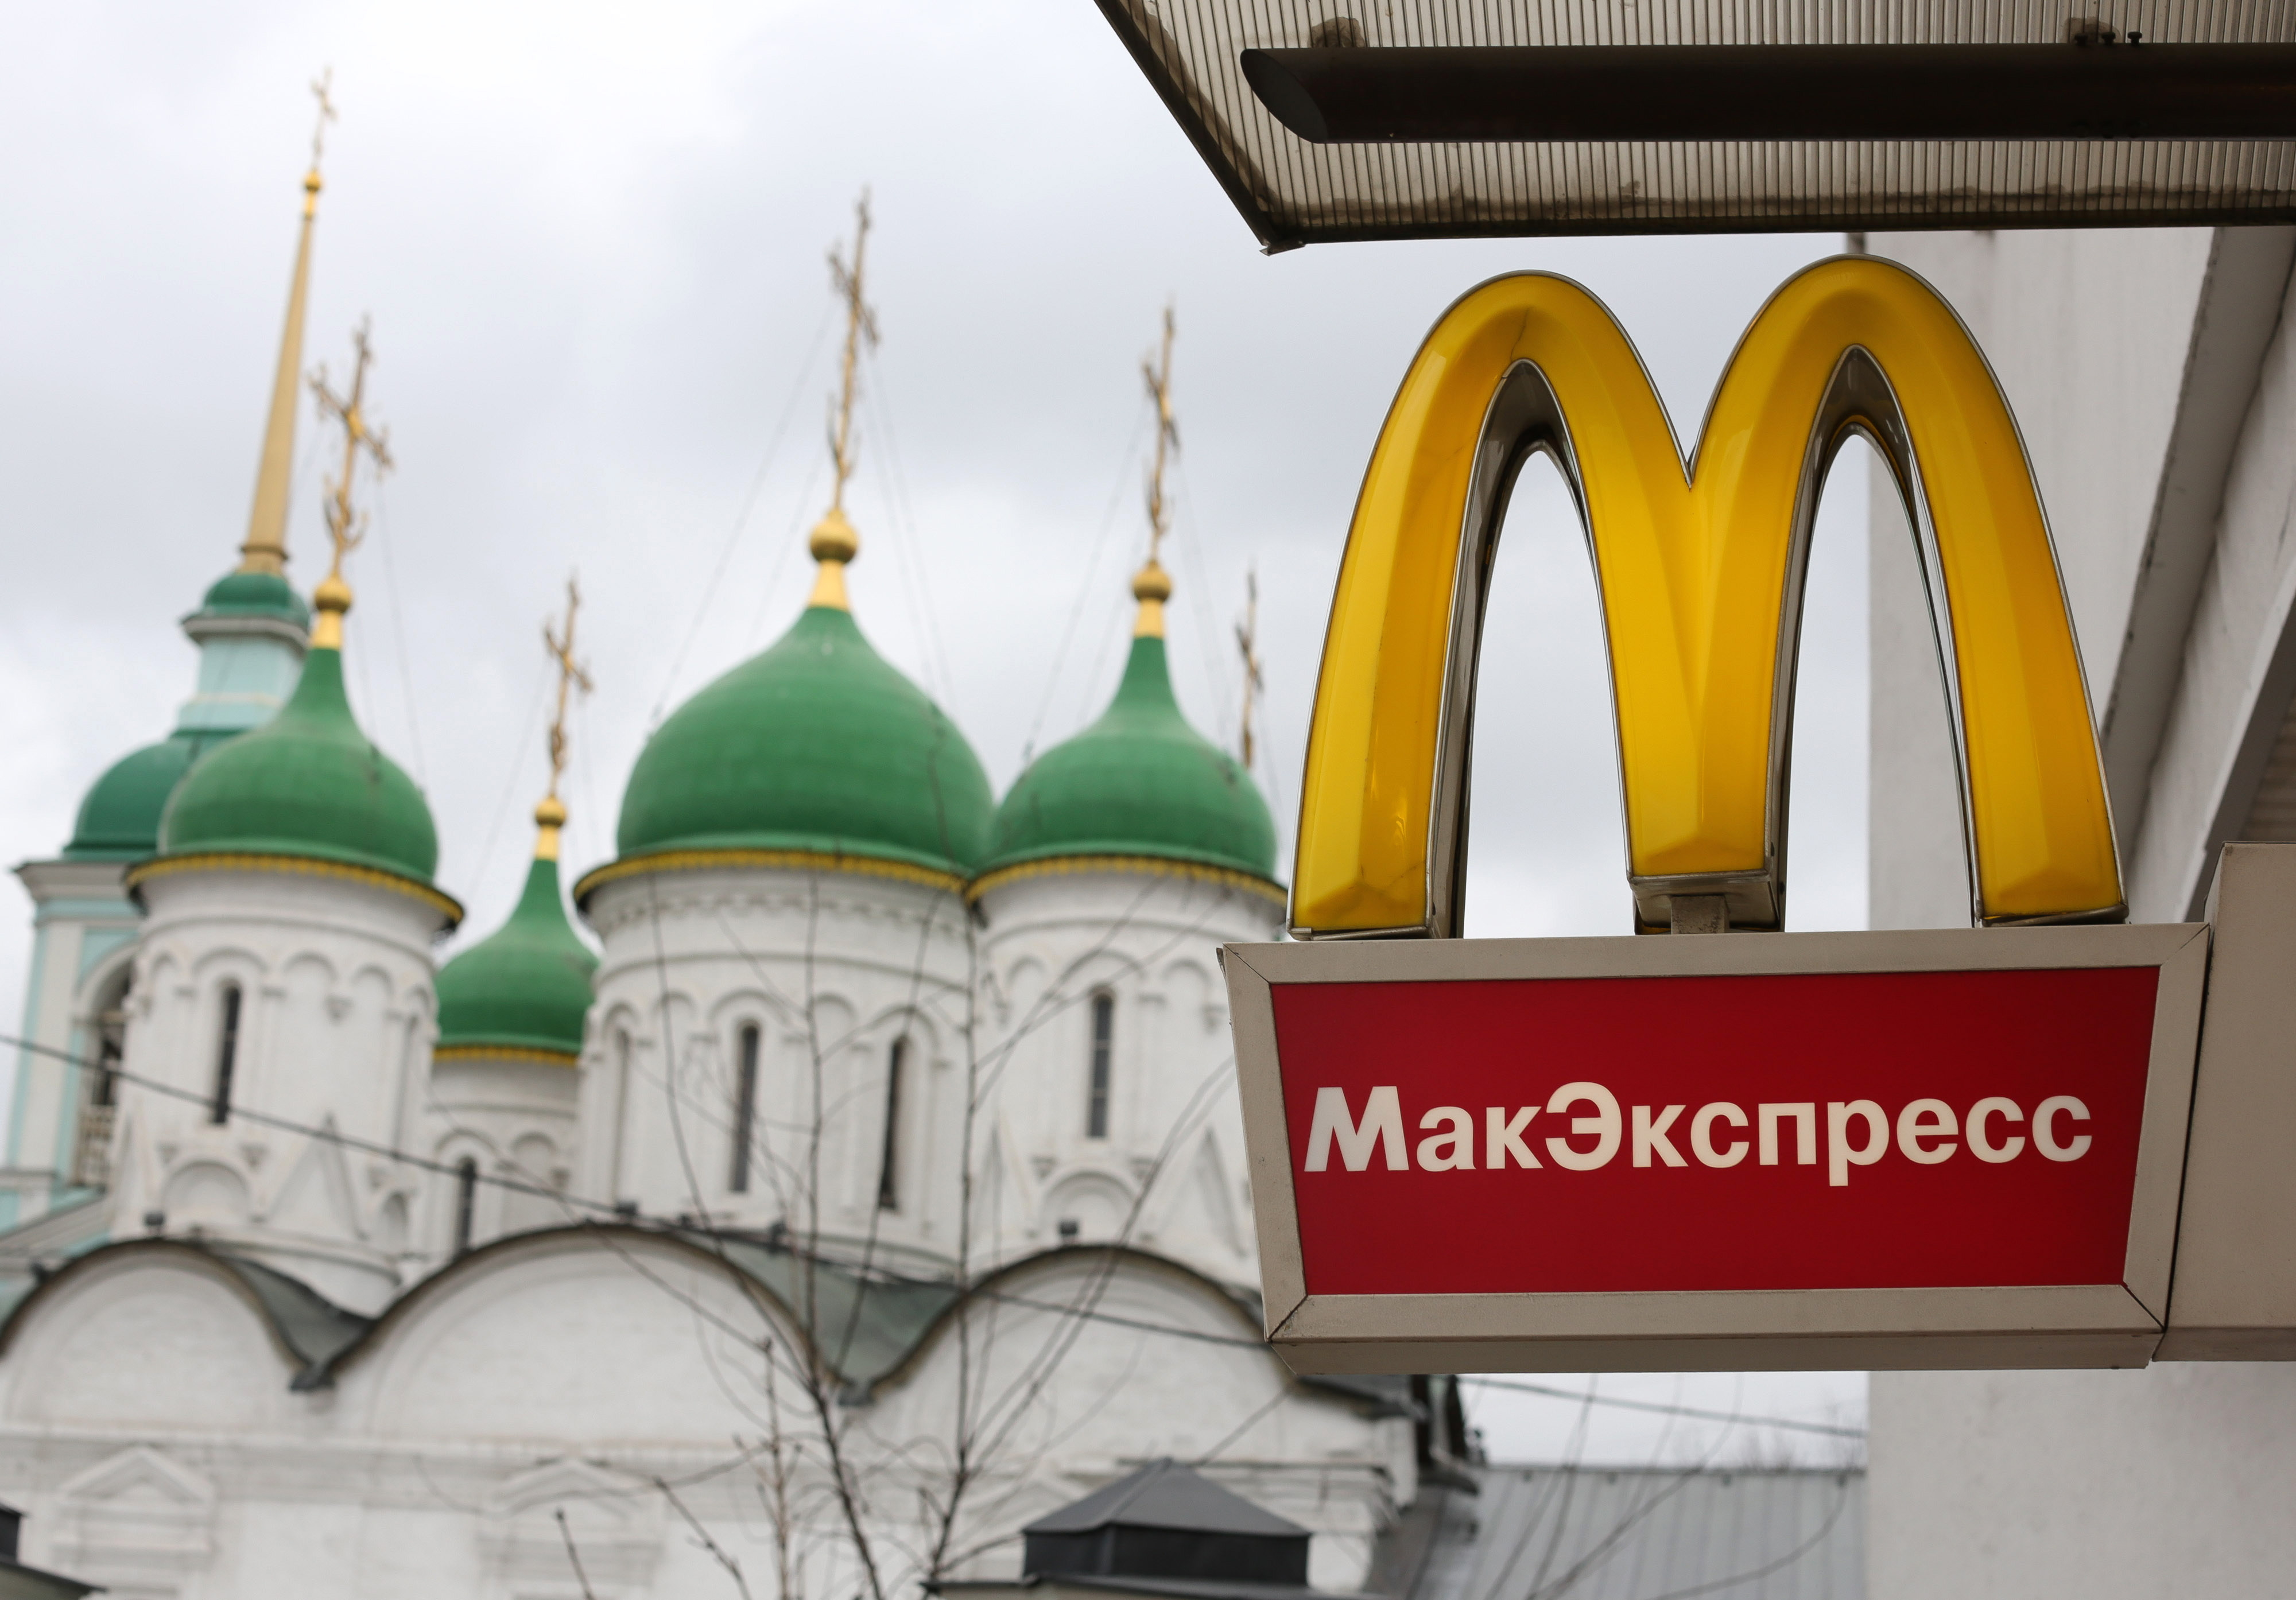 A logo hangs on display outside a McDonald's food restaurant in Moscow, Russia, on Sunday, April 7, 2013. (Andrey Rudakov—Bloomberg / Getty Images)